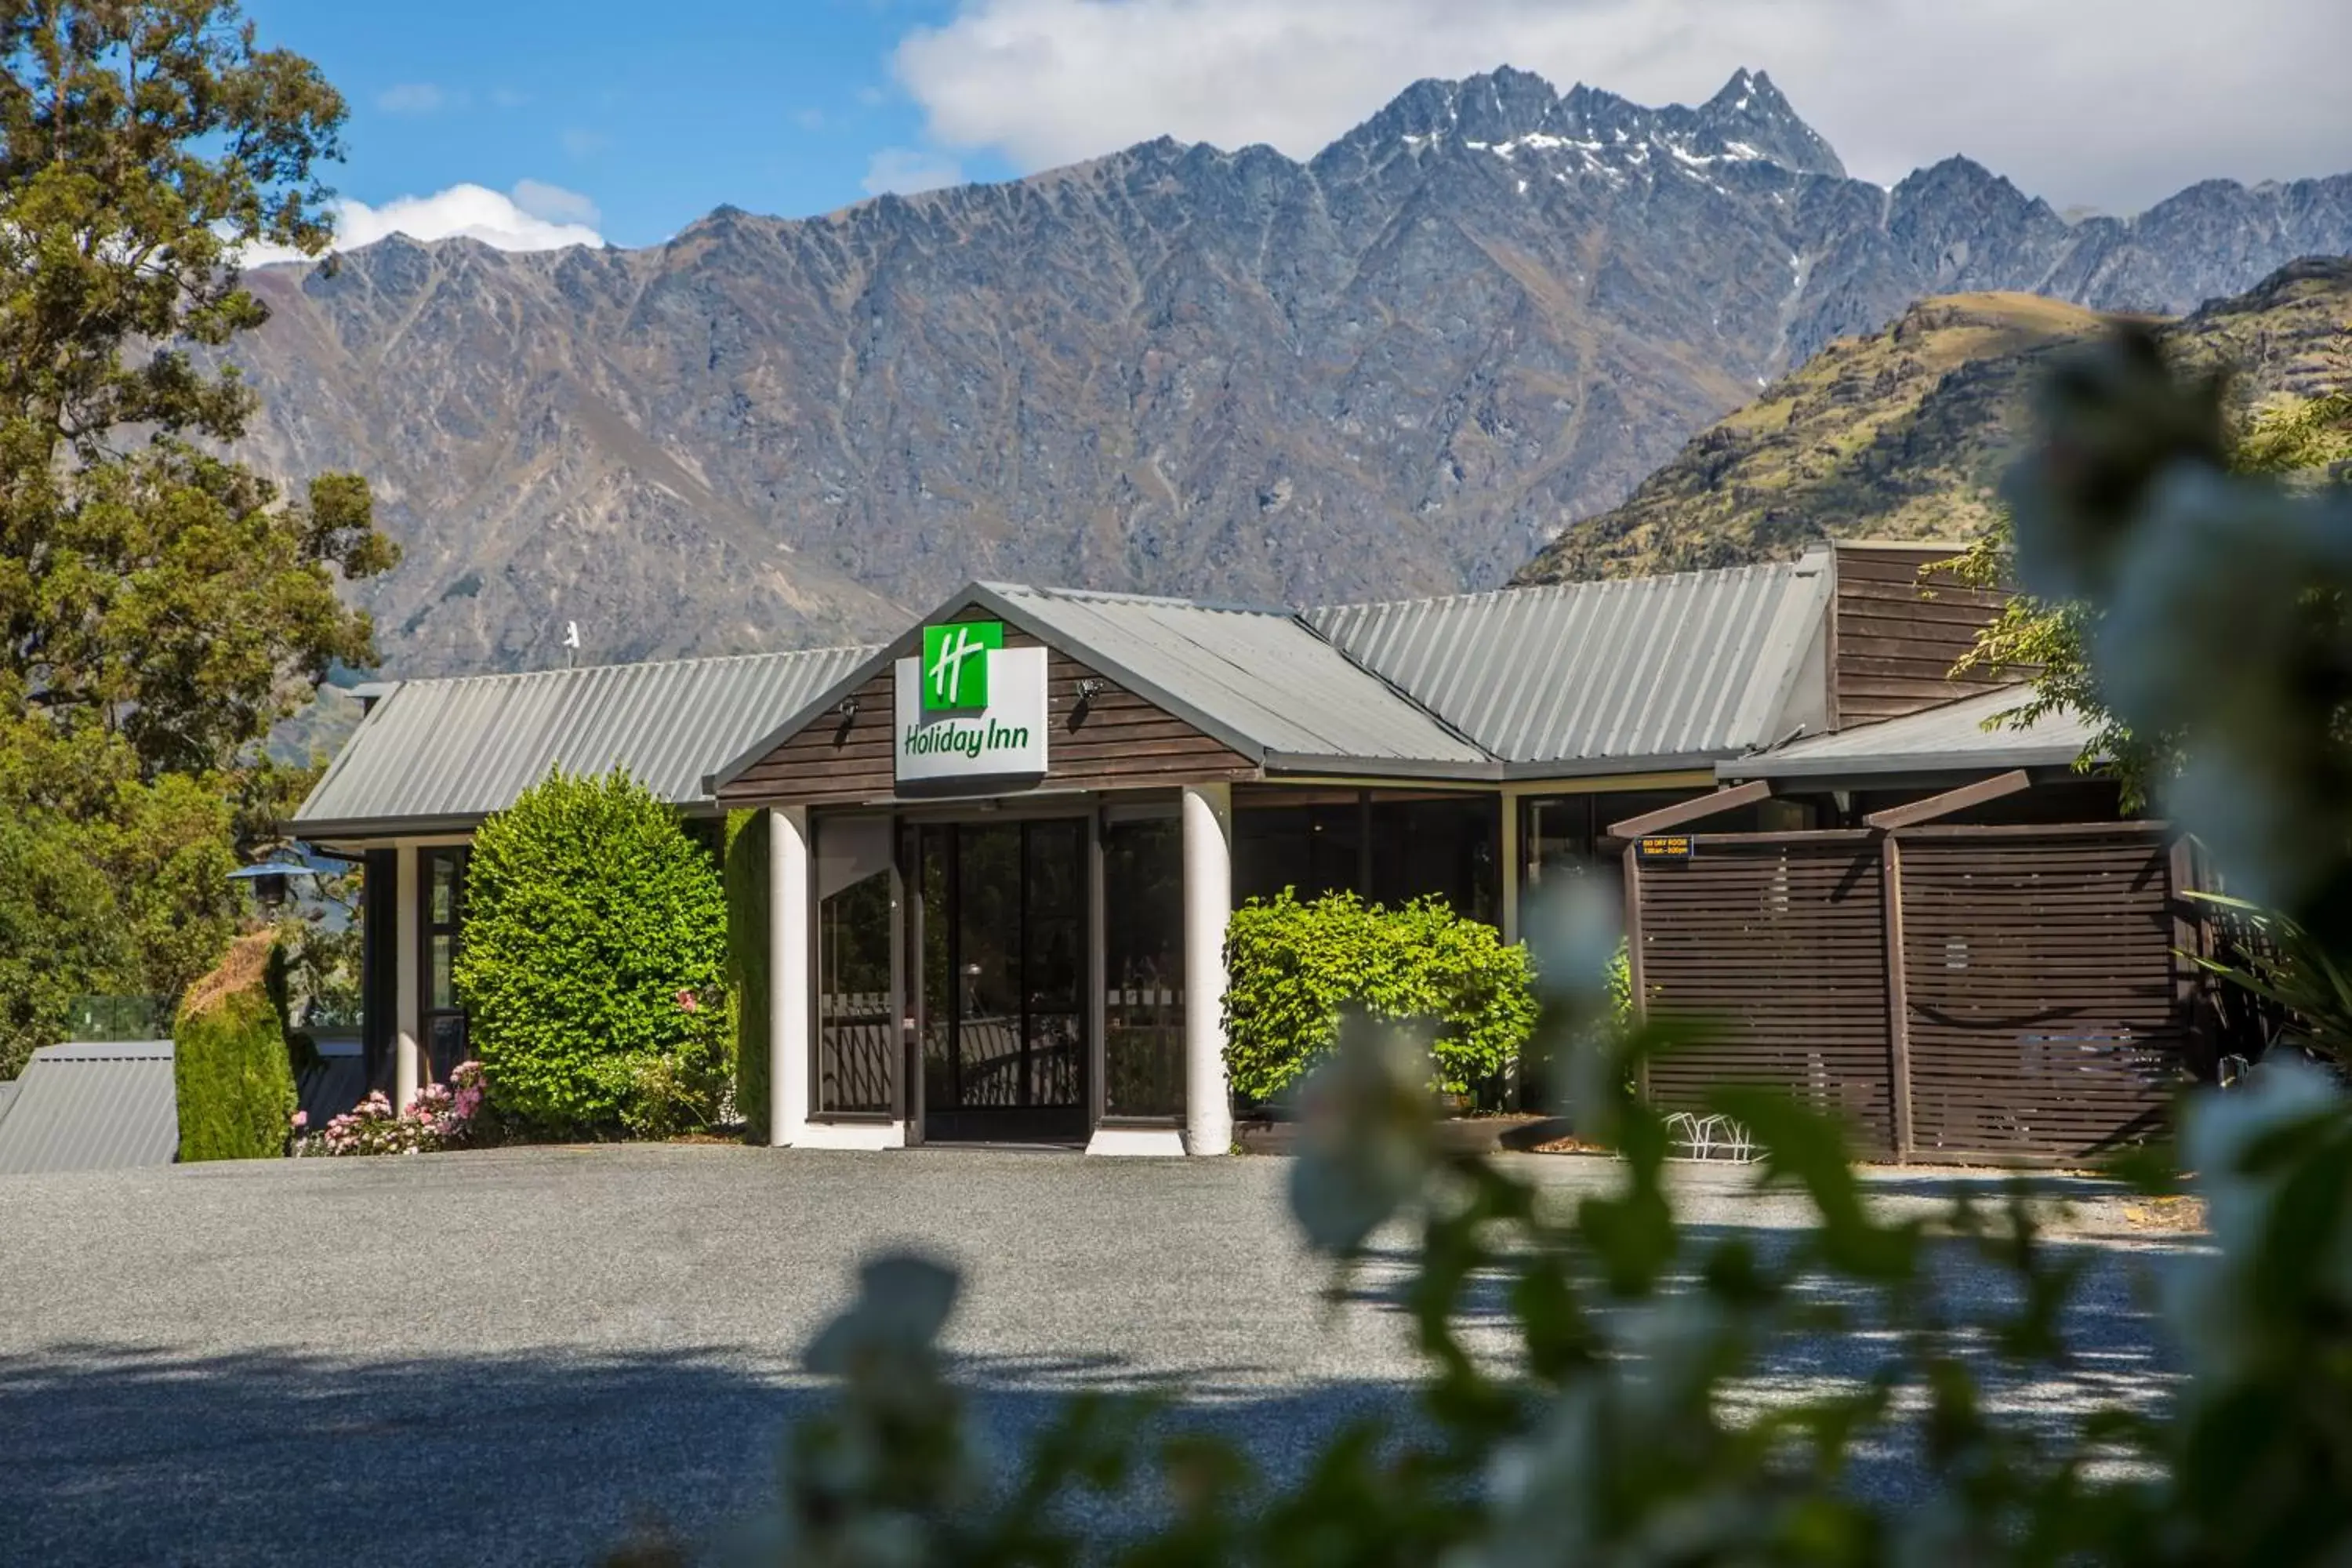 Property Building in Holiday Inn Queenstown Frankton Road, an IHG Hotel